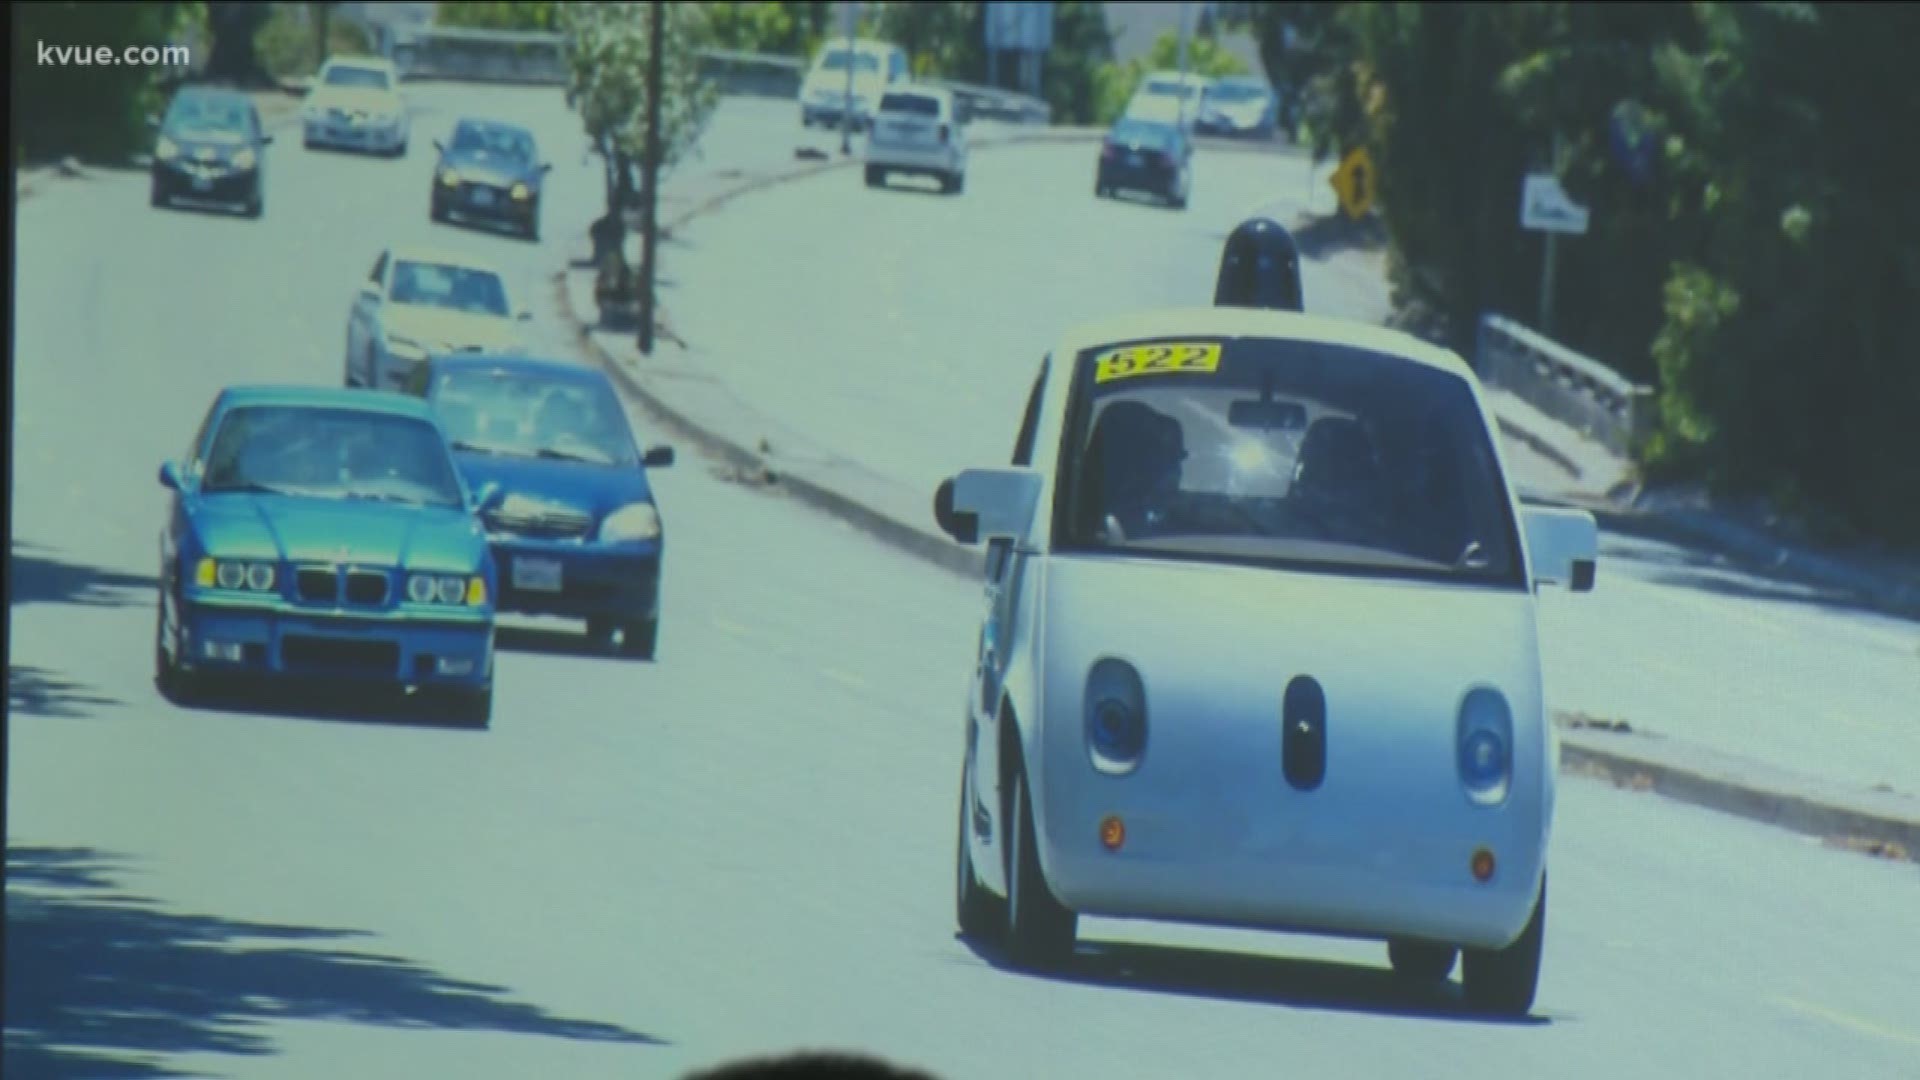 As Texans spend more time in traffic, self-driving cars could become a viable option.